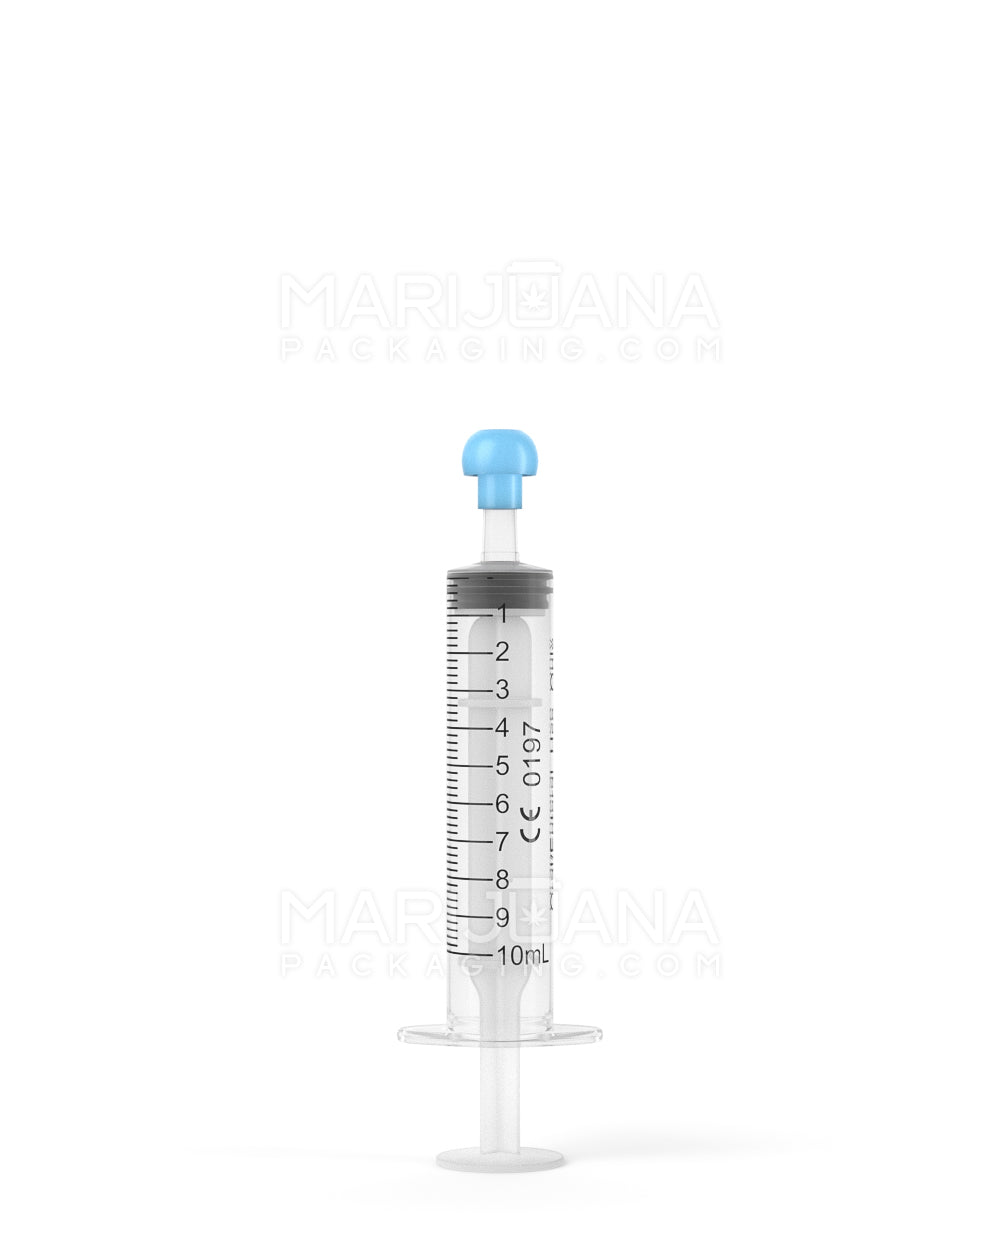 Plastic Oral Concentrate Syringes | 10mL - 1mL Increments | Sample - 8